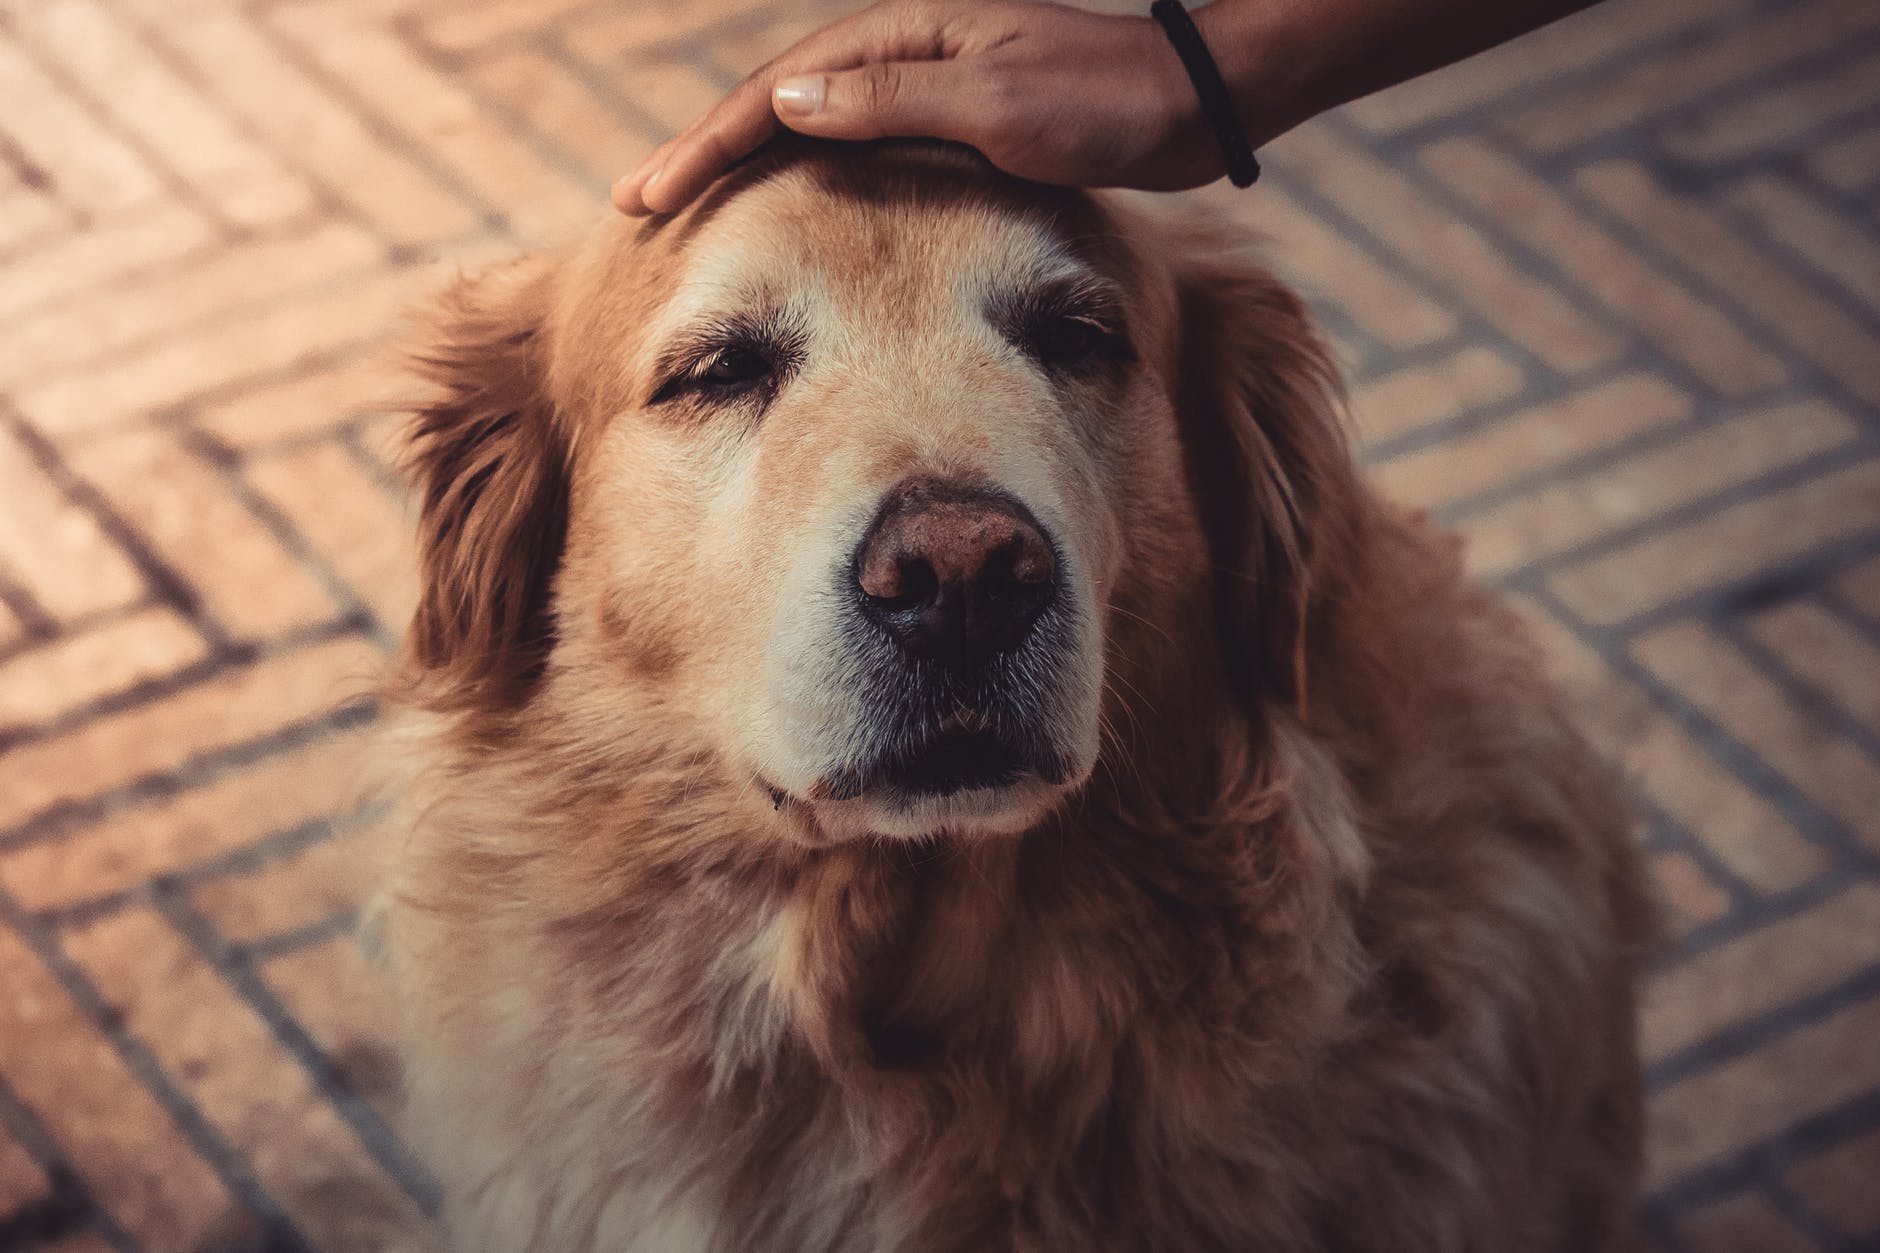 Spaying Golden Retrievers and Cancer